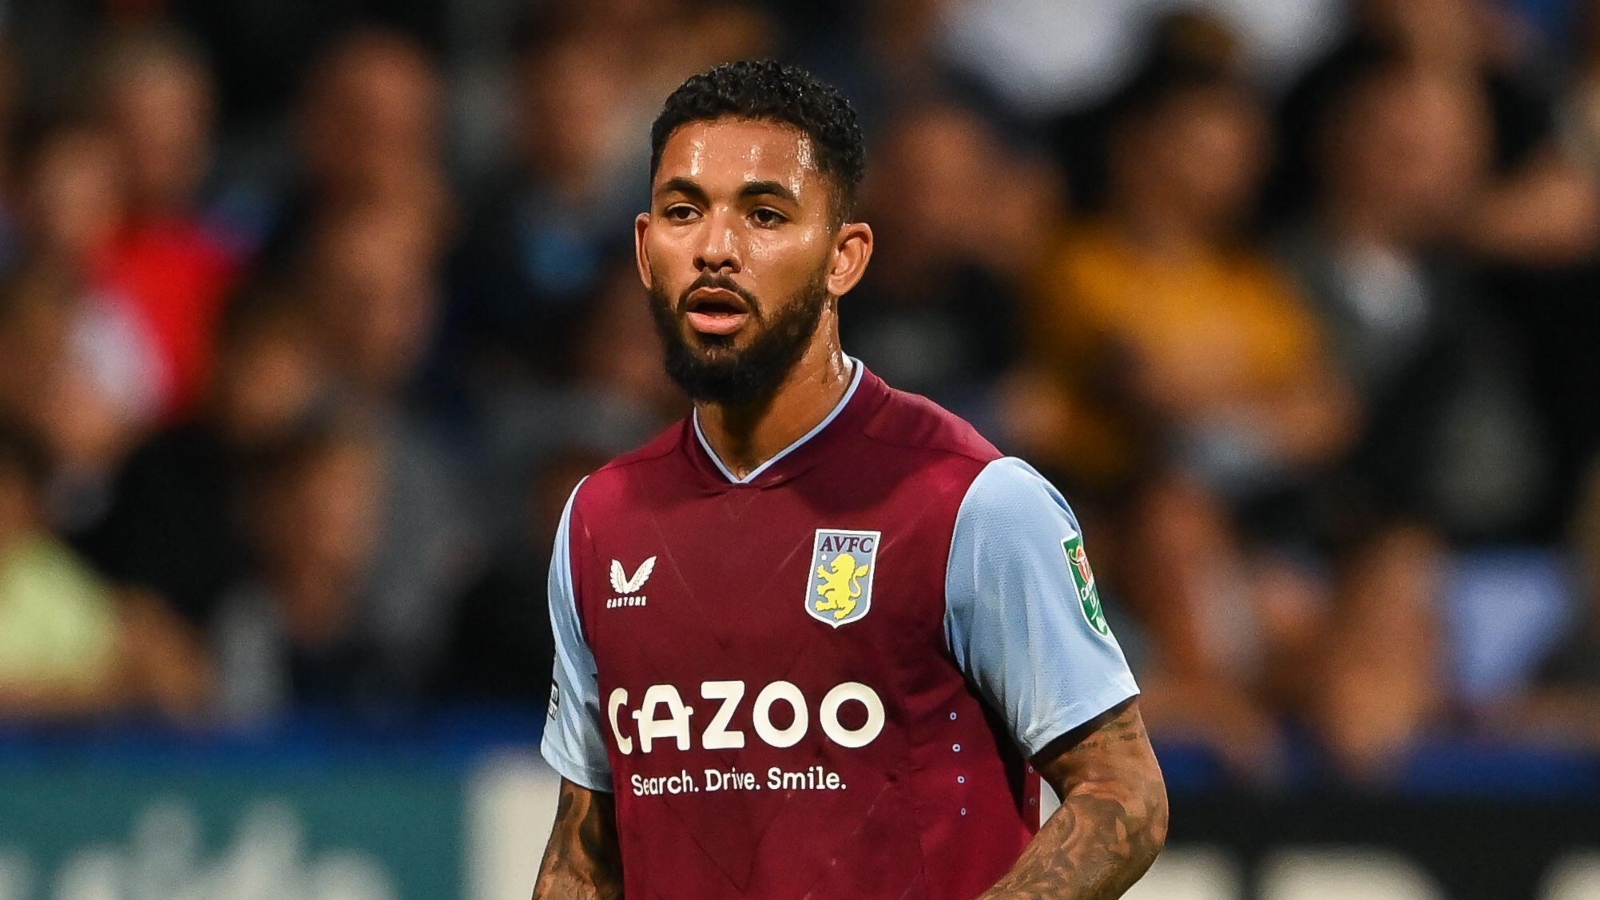 Douglas Luiz Age, Salary, Net worth, Current Teams, Career, Height, and much more